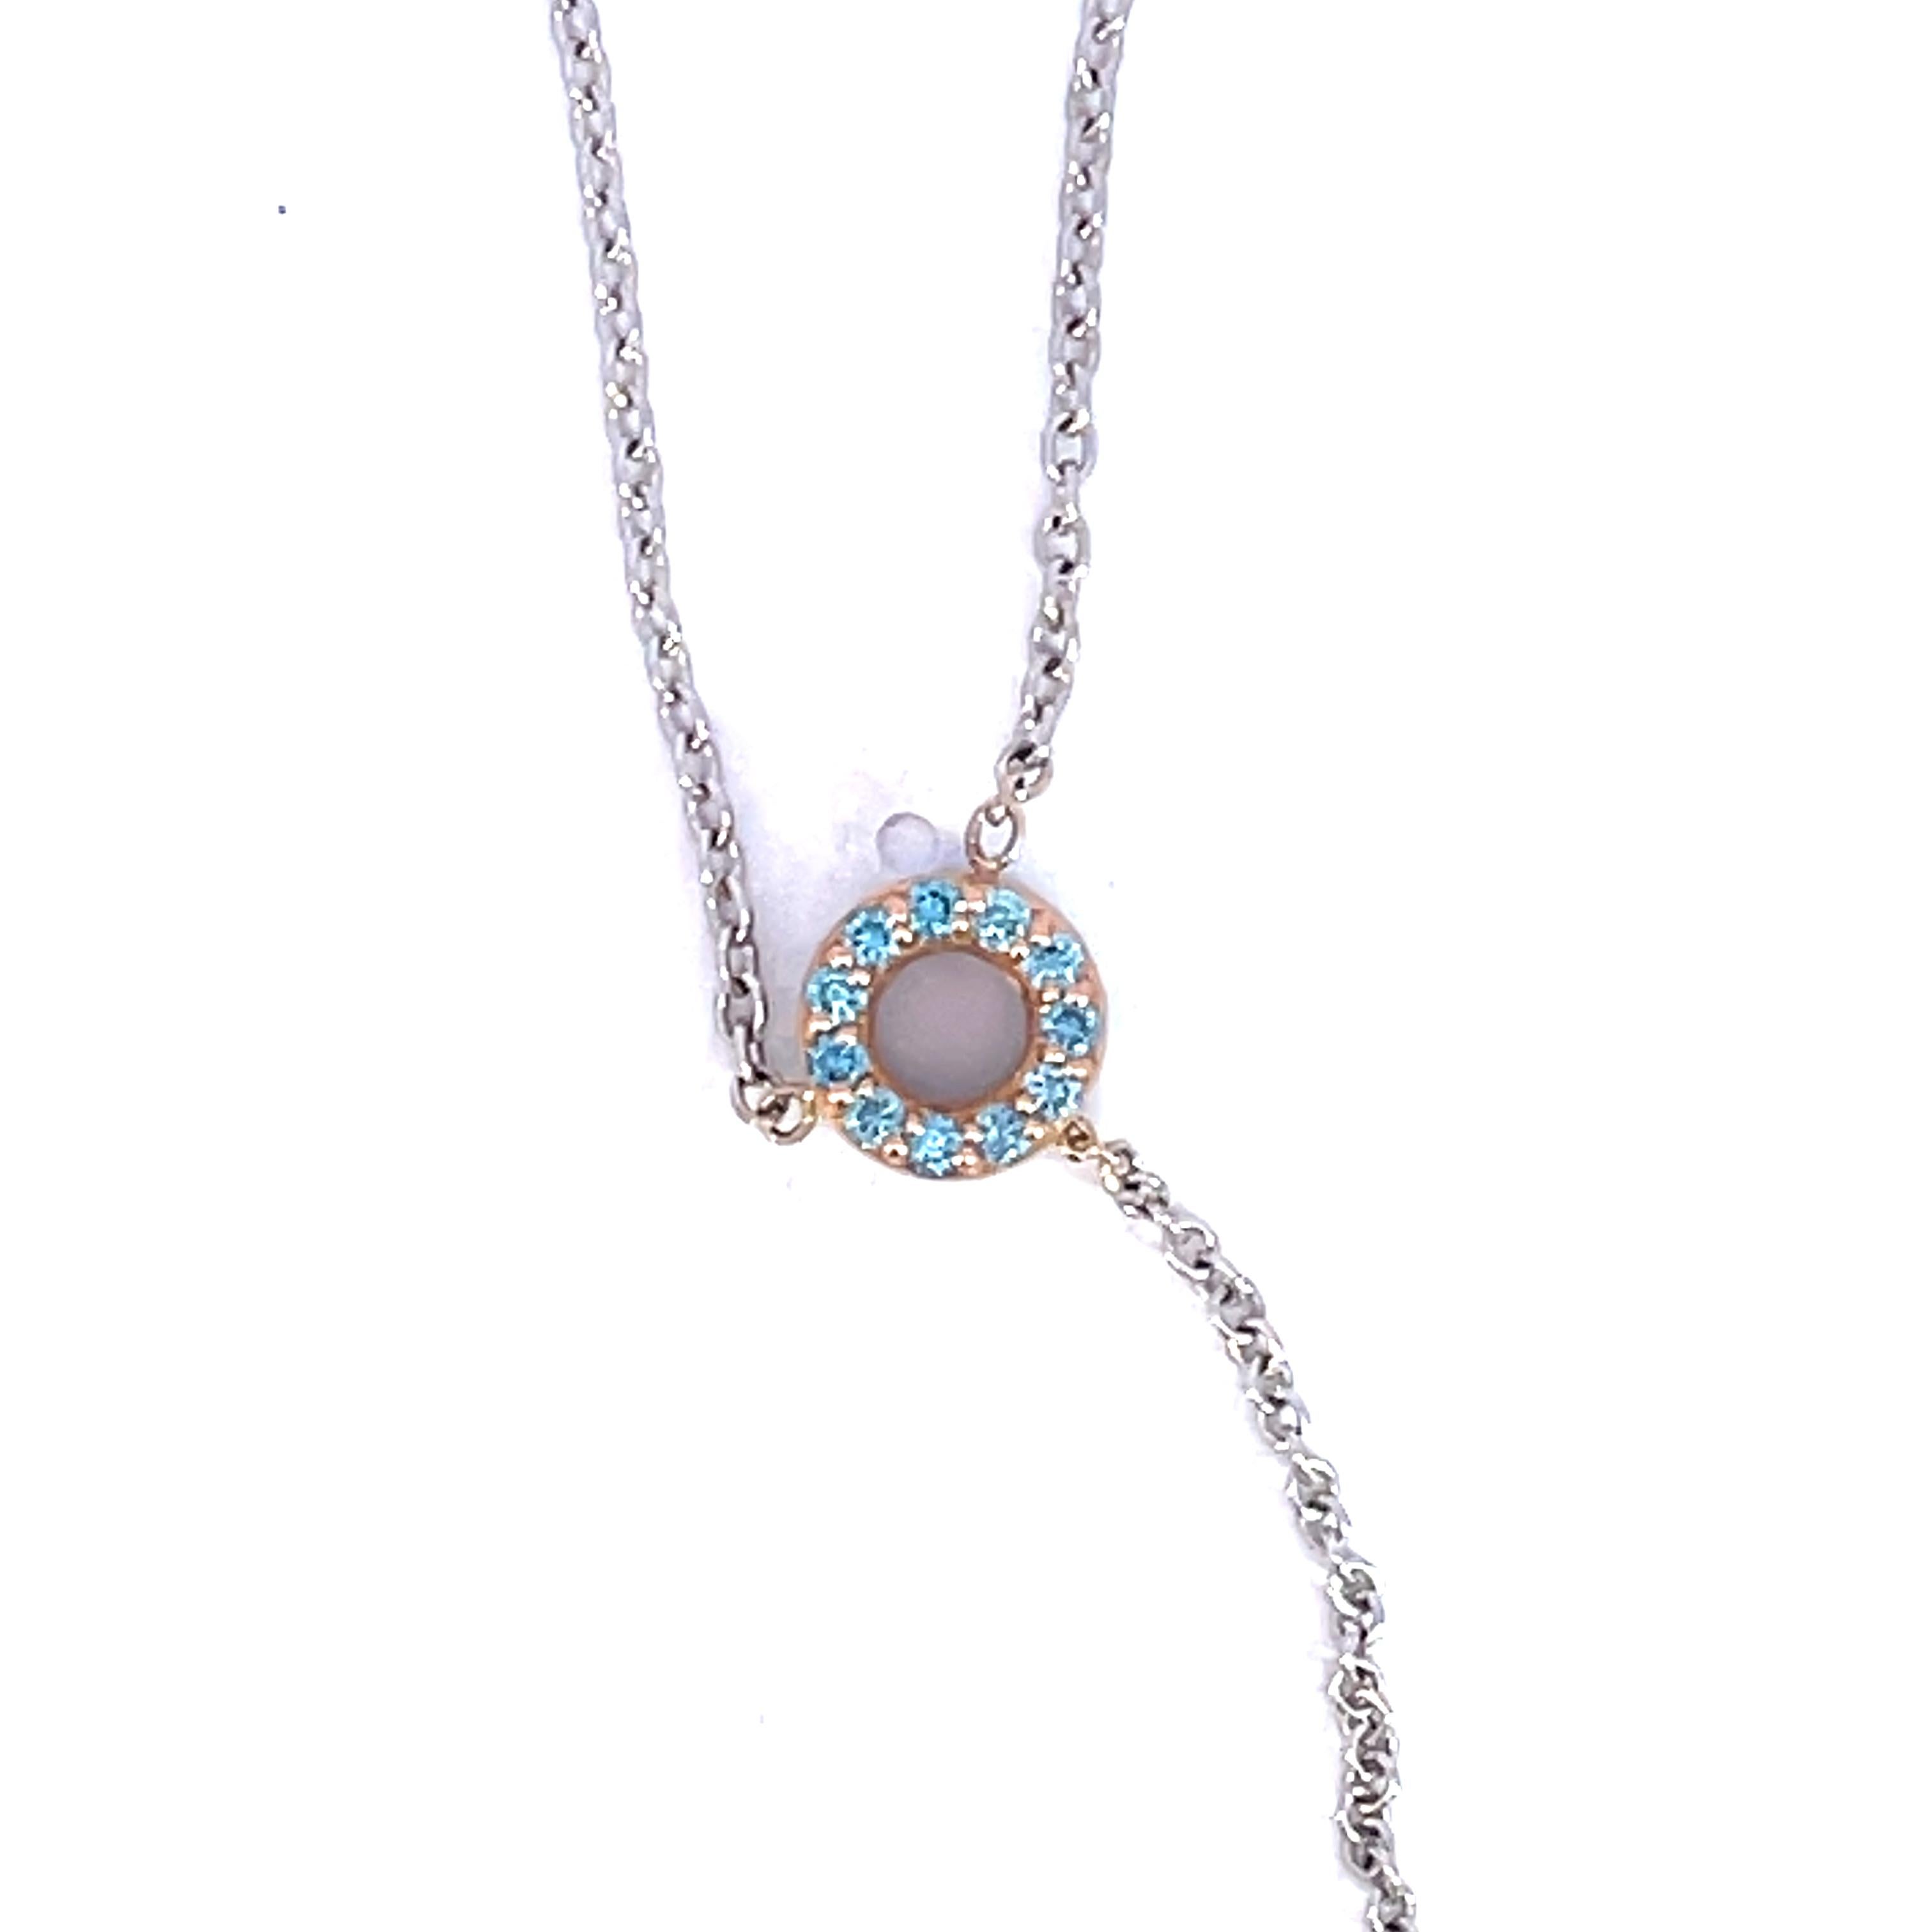 Briolette Cut 18k Rose and White Gold Opal Lariat Necklace with a Reversible 